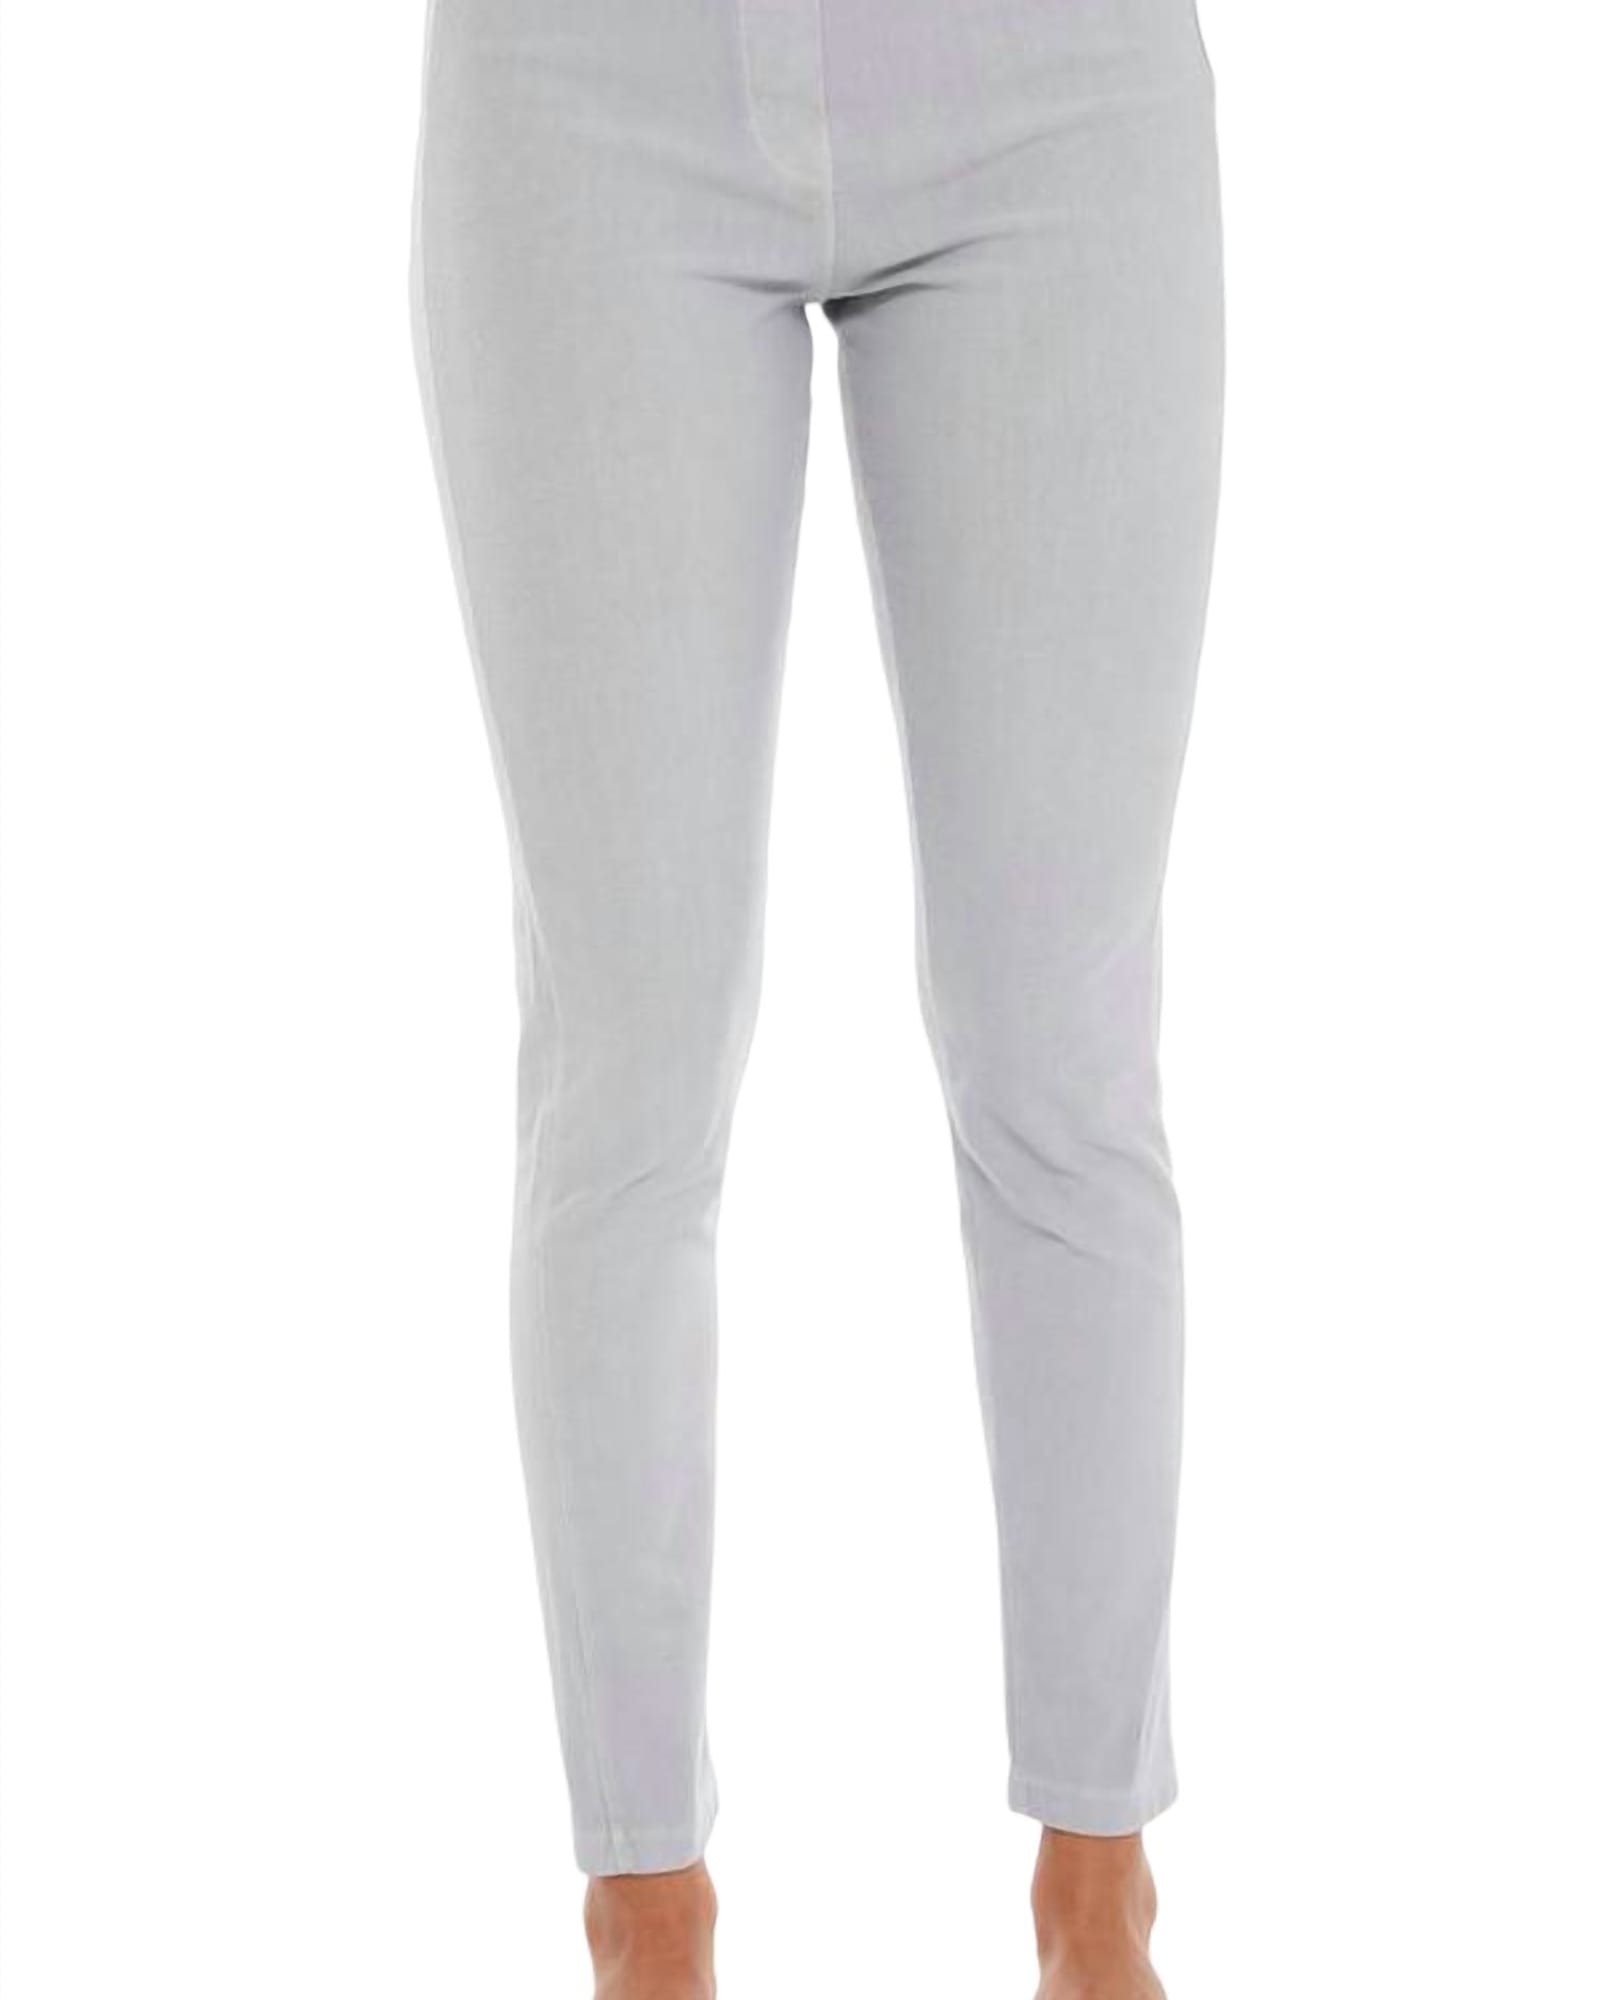 Low Rise Jegging In Grayblue | Grayblue